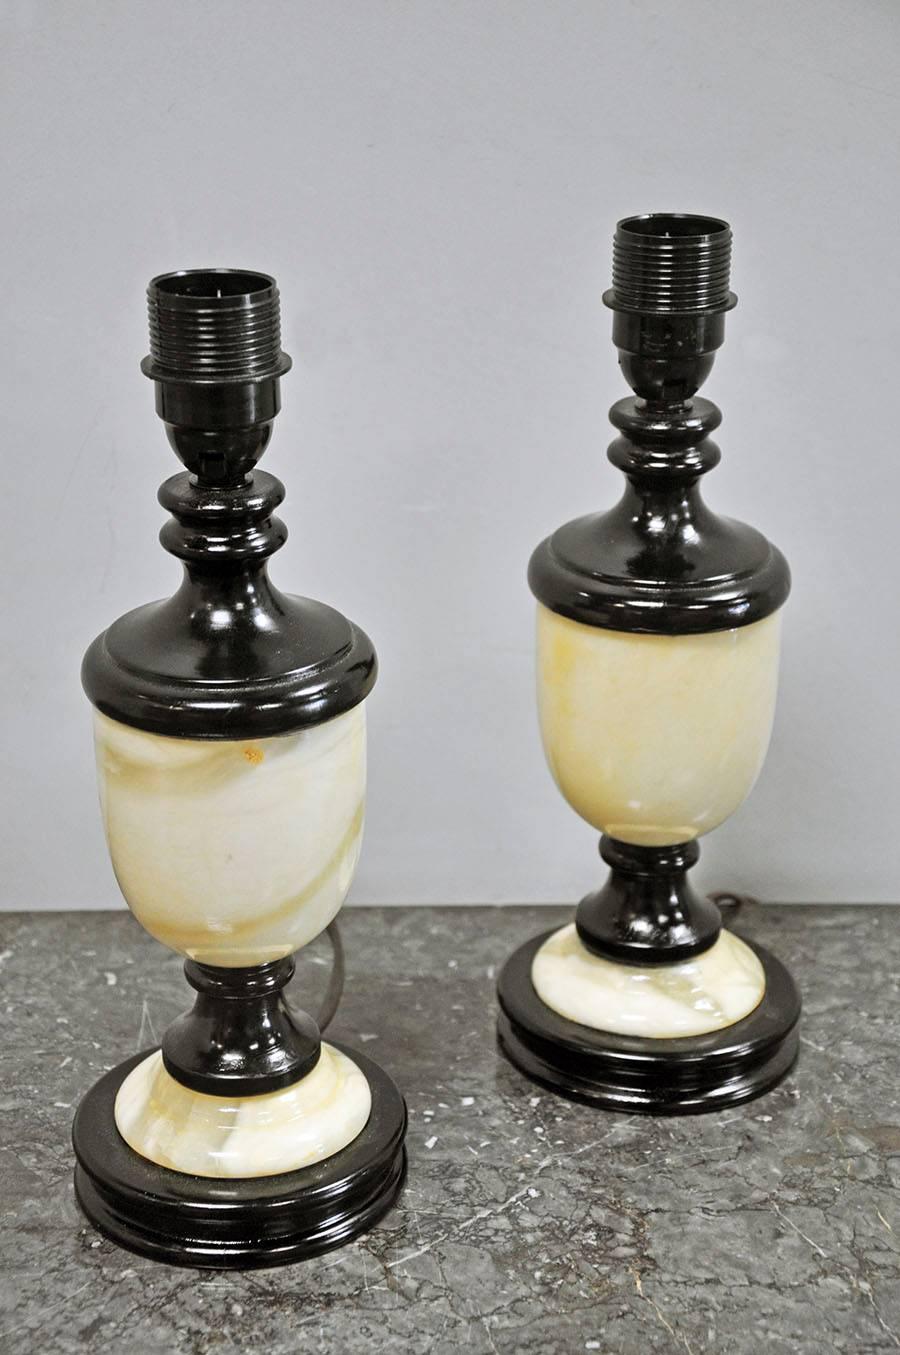 Pair of petite 20th century marble lamps with linen shades. Beautiful cream and ivory stone veining mounted on lacquered wood. Not wired to US standards. Lamp base measures 4.5" D x 10" H. Shade measures 12" D x